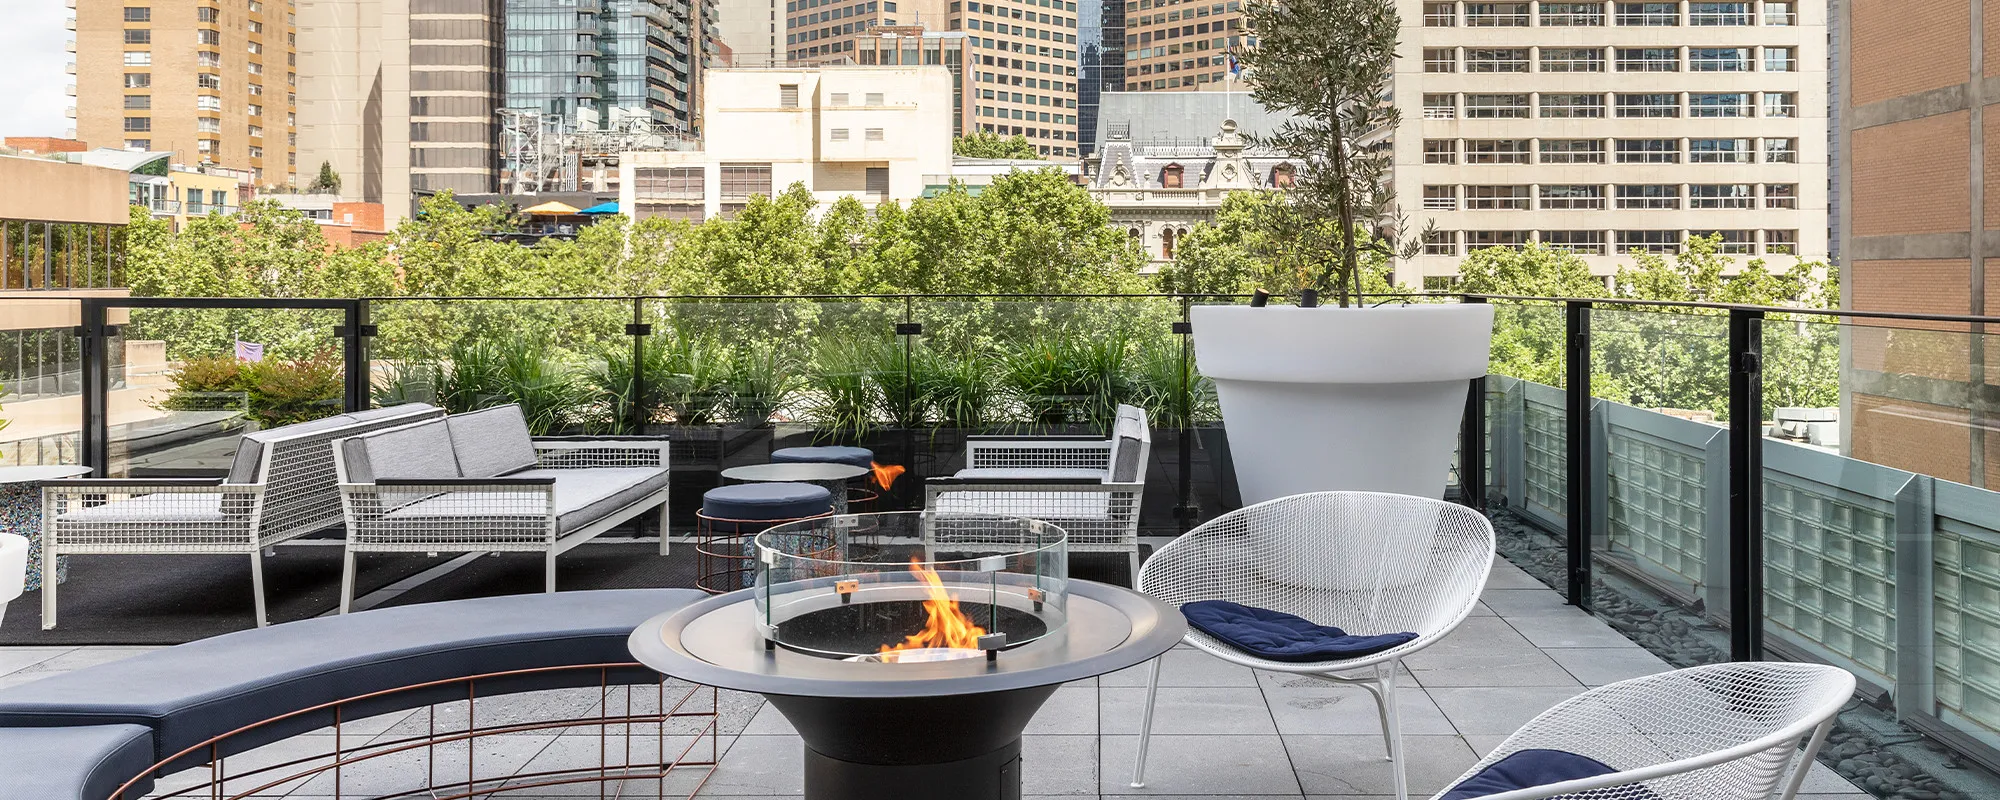 Lancemore Crossley st Boutique Luxury Accommodations Melbourne rooftop terrace Events 2000 x 800 6